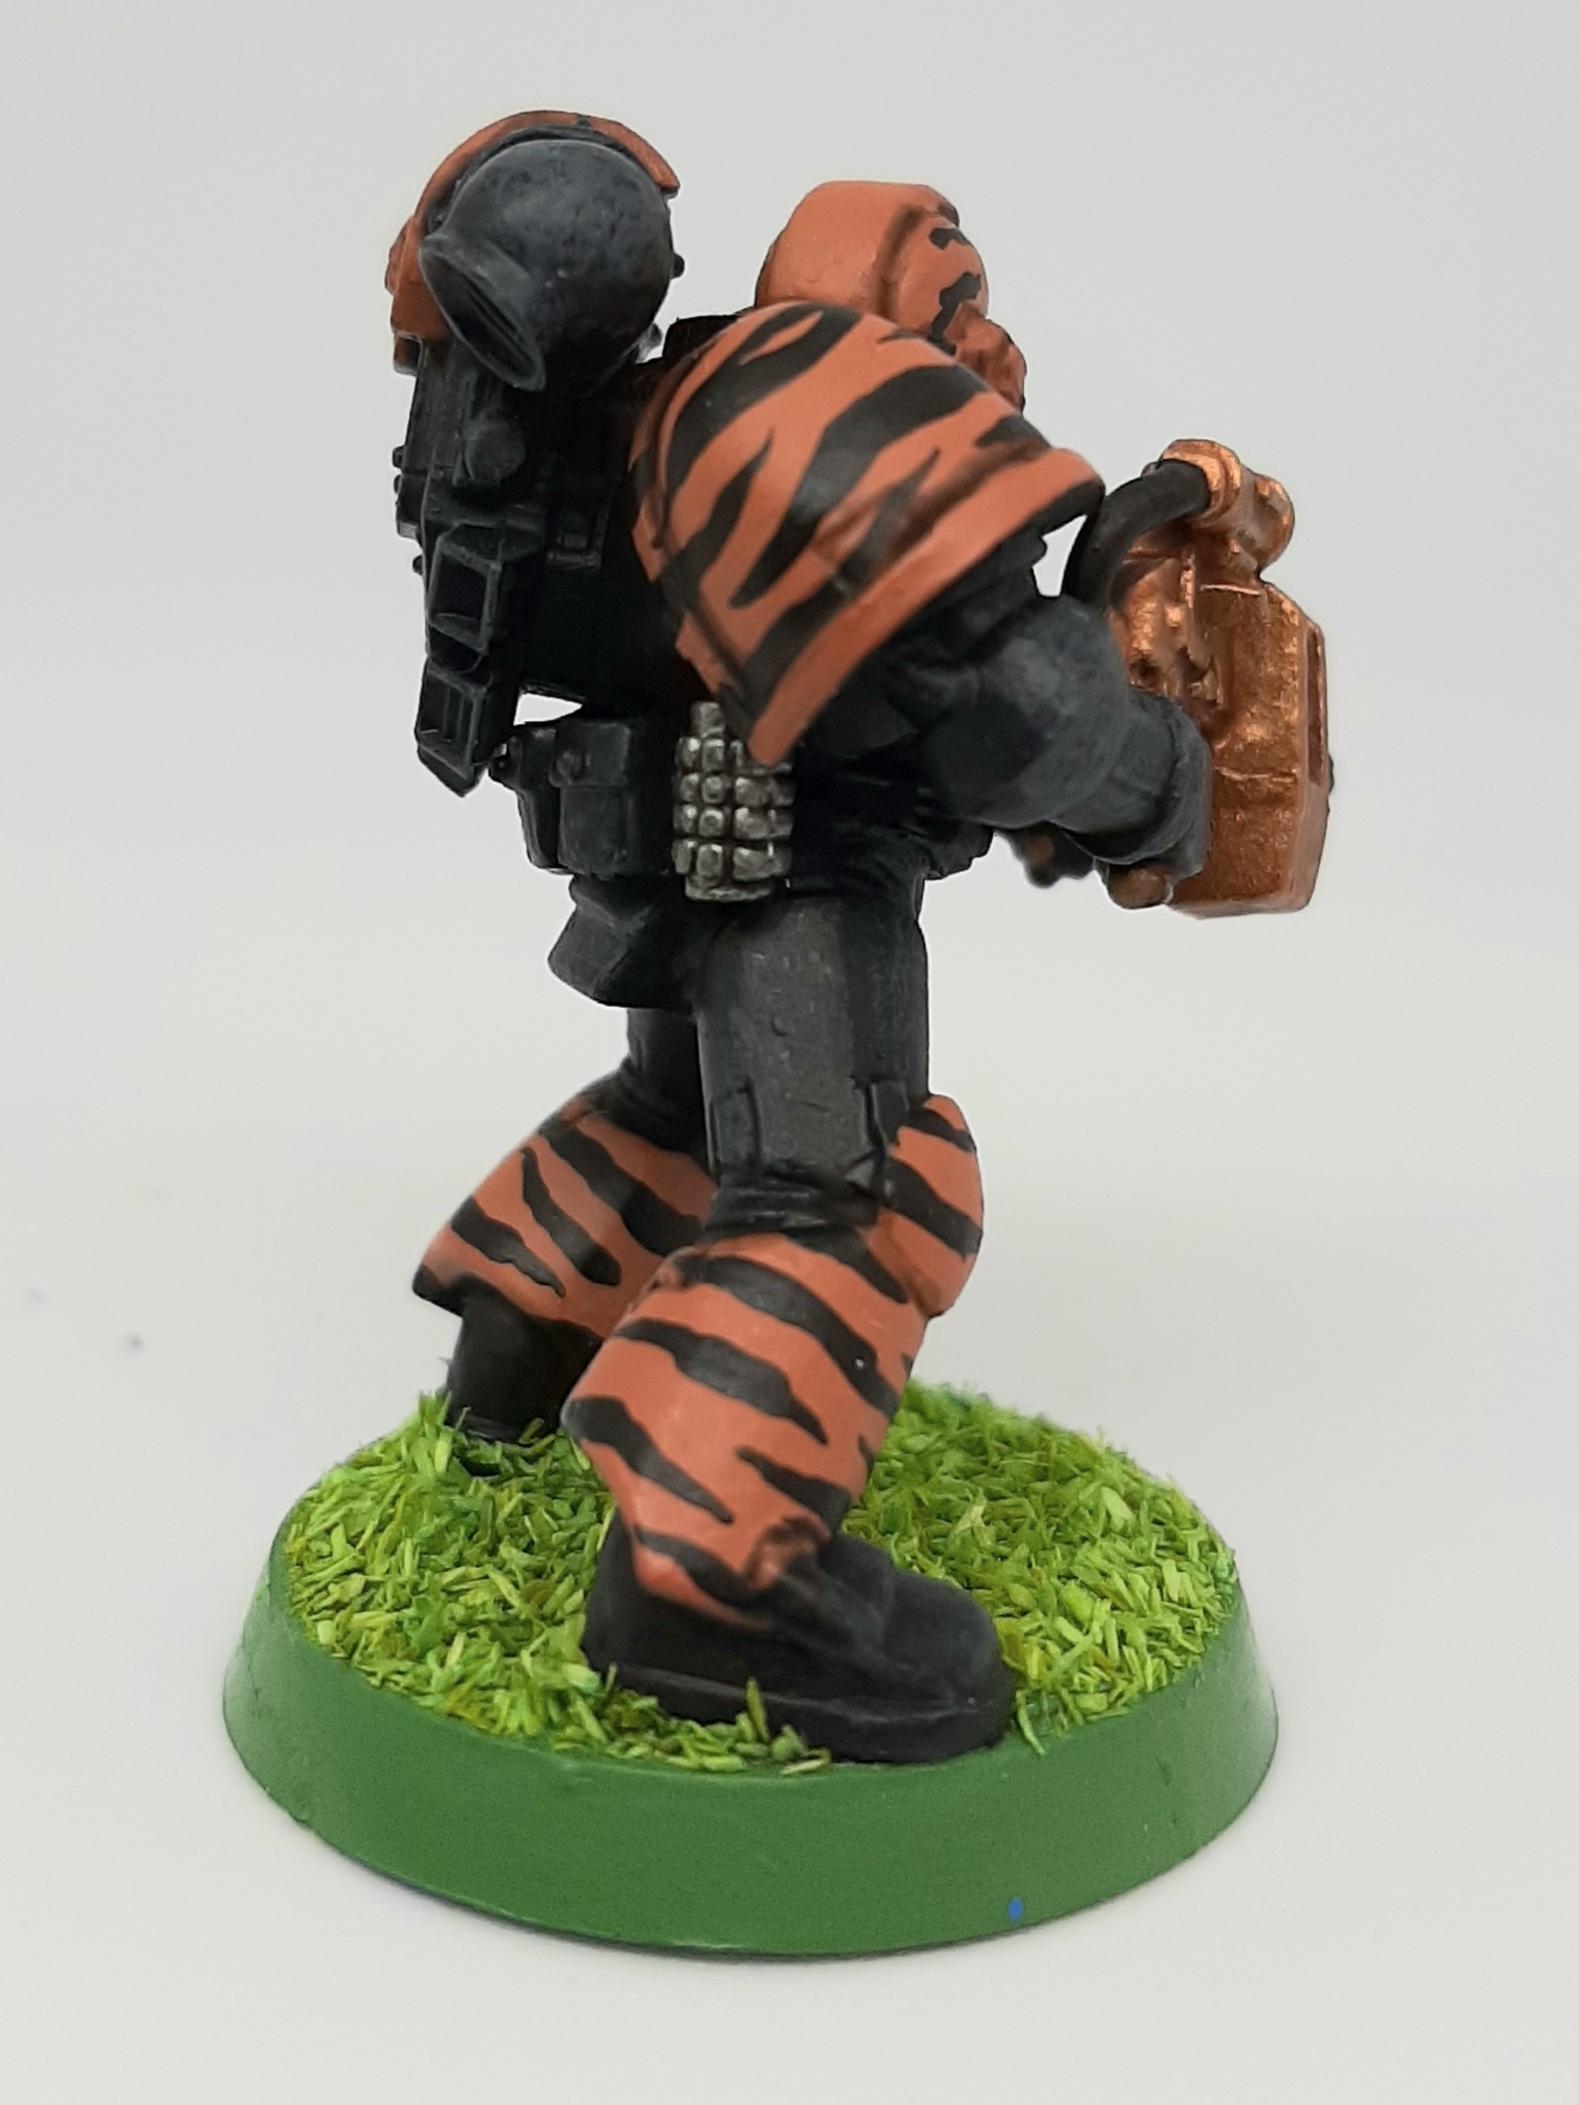 Adeptus, Ammo, Ammunition, Artificer, Astartes, Bolter, Boltgun, Camouflage, Conversion, Custom, Fighting, Forest, Ghuyarashtra, Issue, Jungle, Kitbash, Knife, Rounds, Space, Space Marines, Special, Sternguard, Tigers, Unique, Veda, Veteran